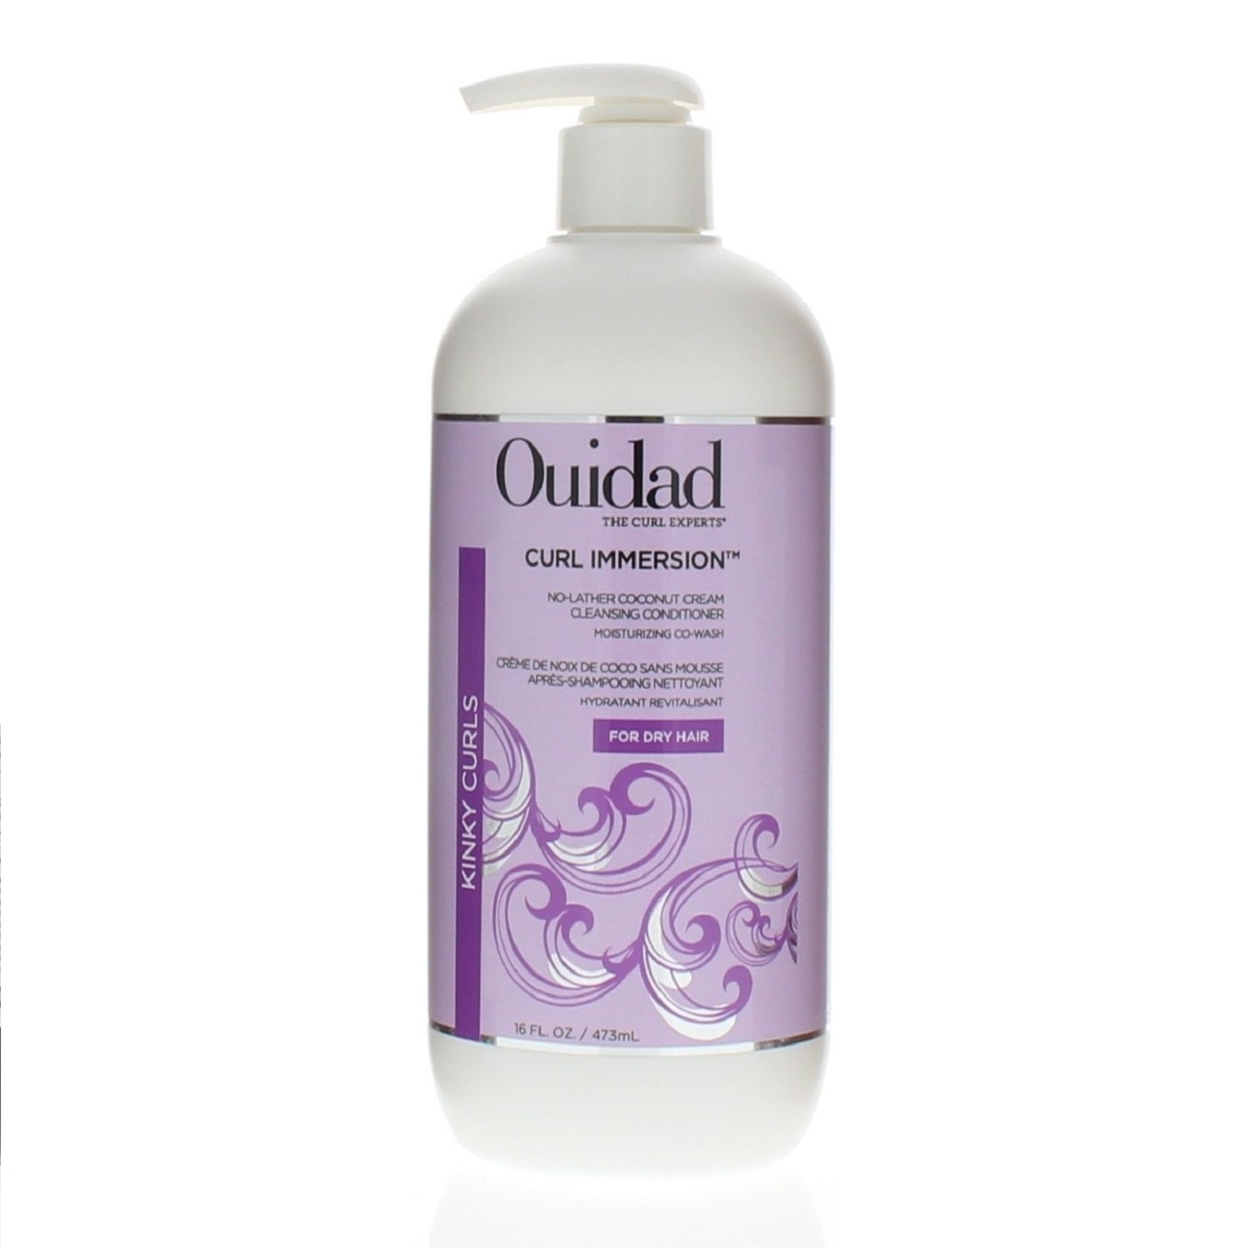 Ouidad Curl Immersion No-Lather Coconut Cream Cleansing Conditioner 16oz/473ml